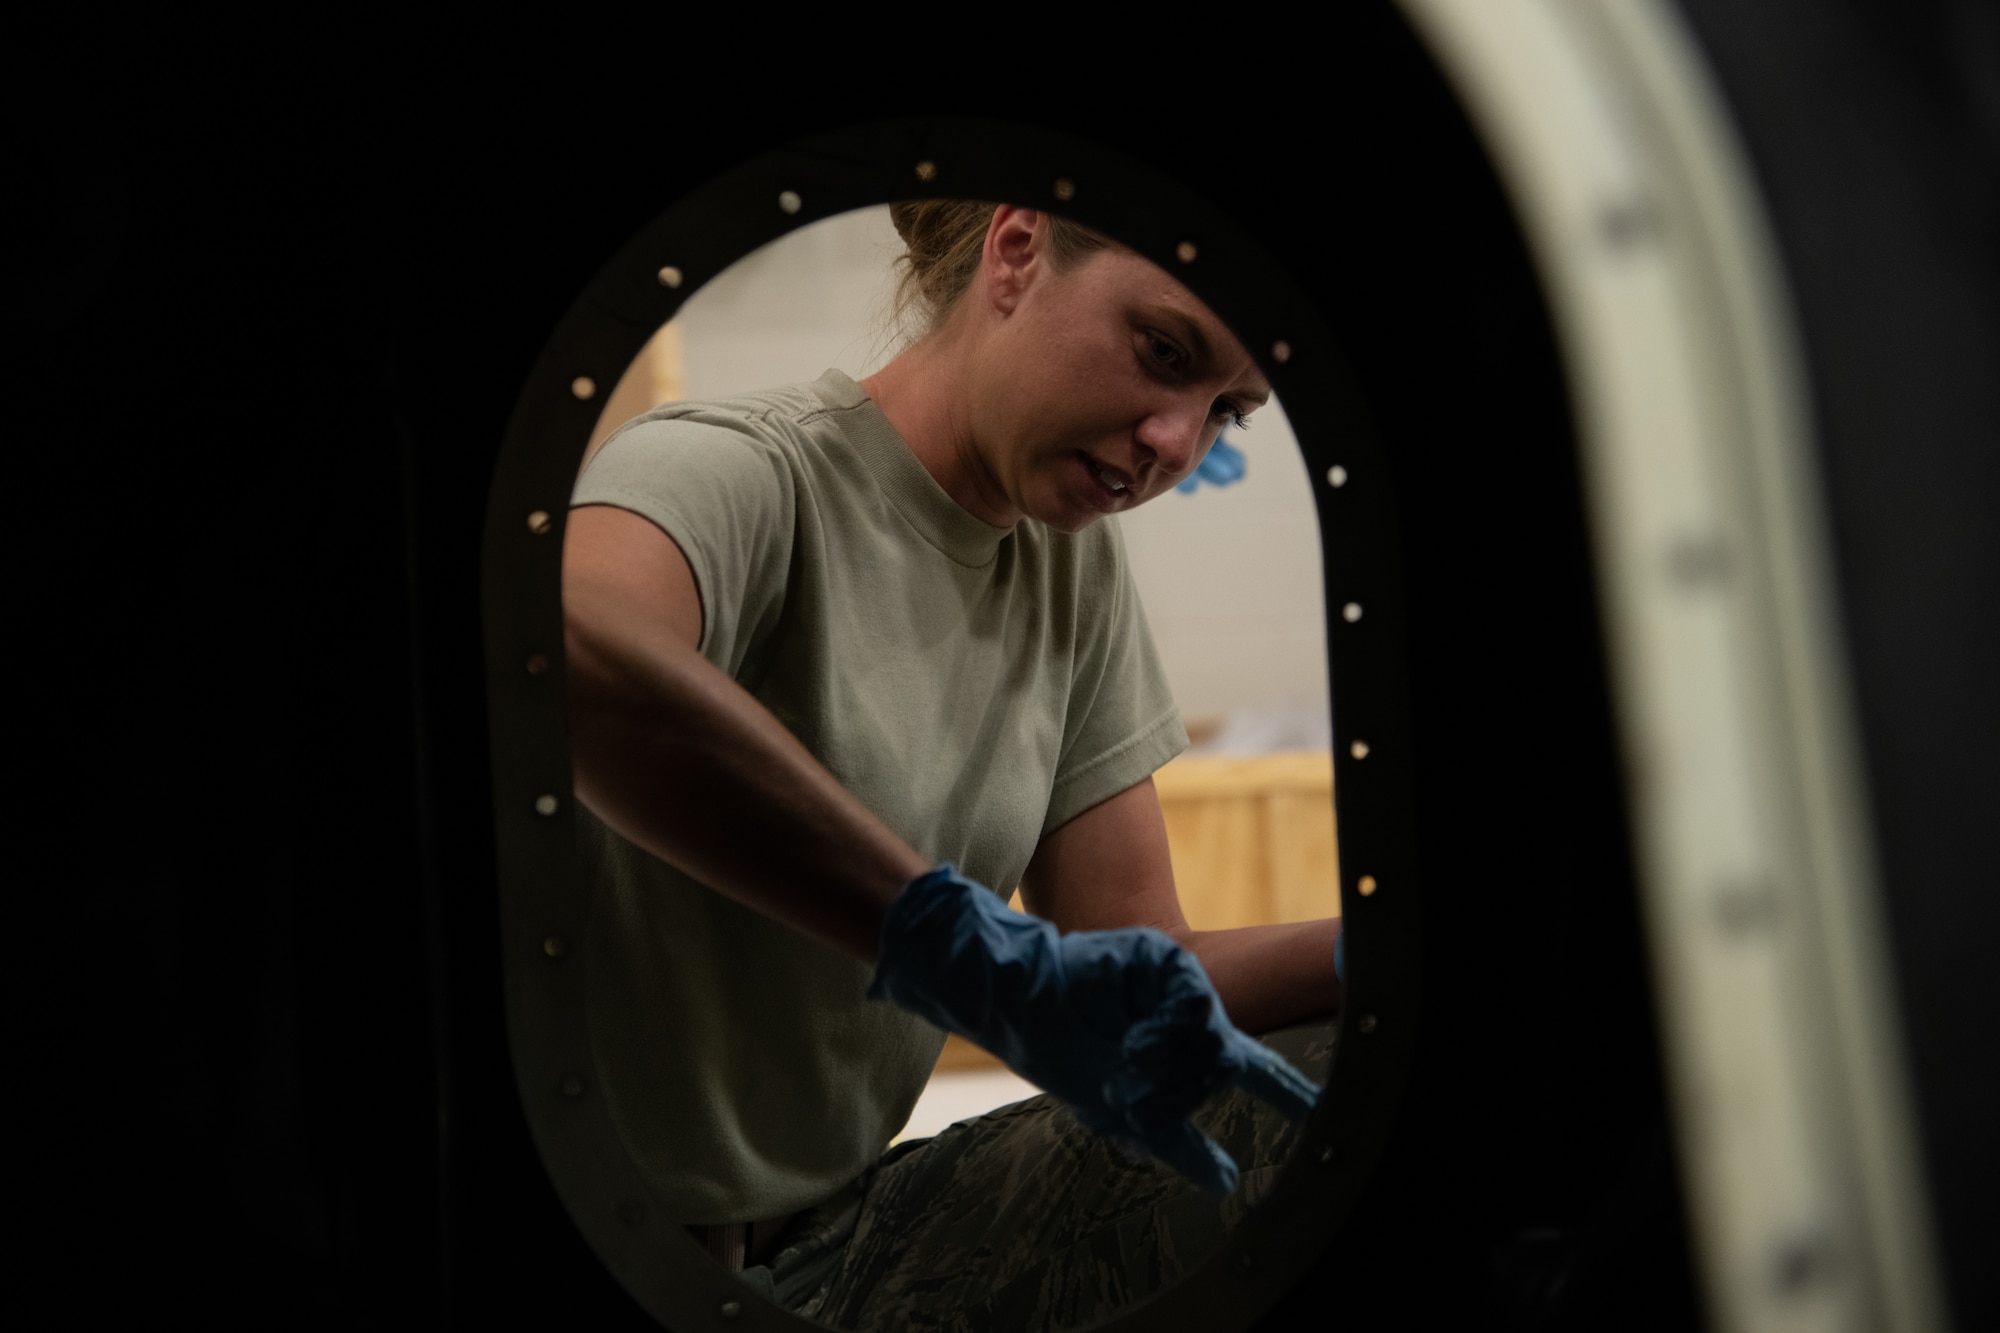 Fuel technician applies grease to metal frame of an aircraft fuel cell.